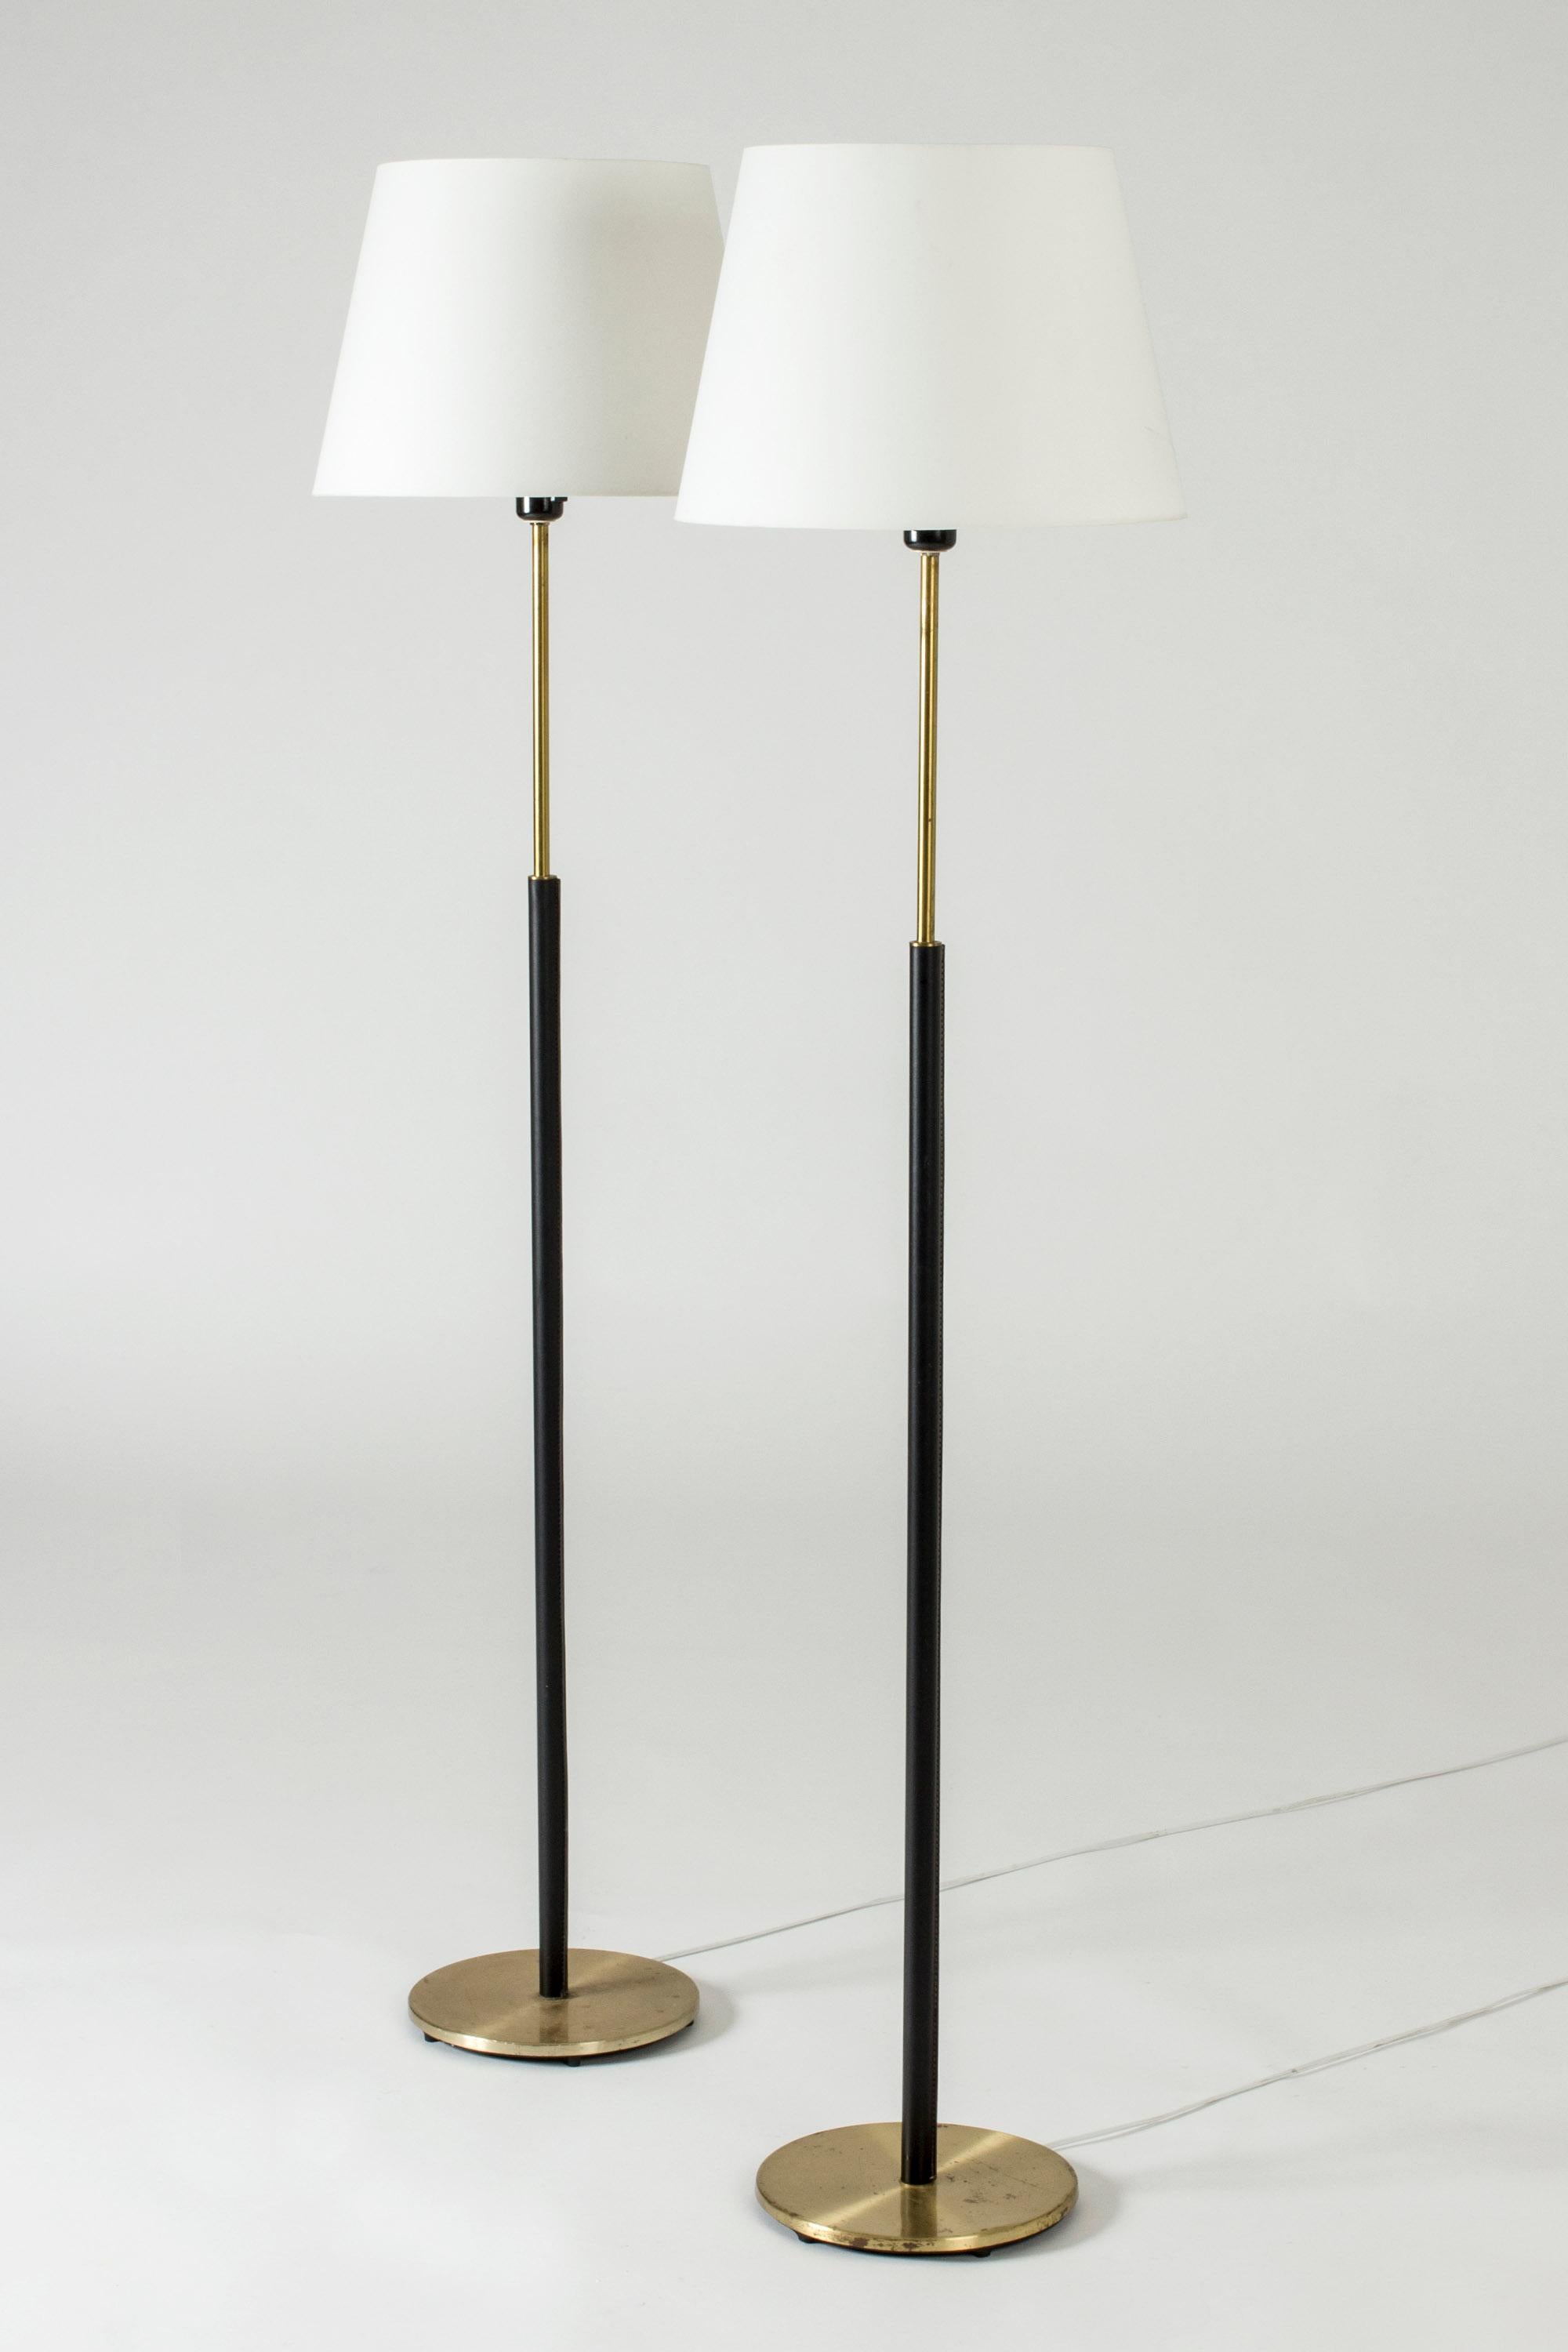 Pair of elegant floor lamps from Falkenbergs Belysning, made from brass. Sleek stems dressed with black leather, decorative white seams.